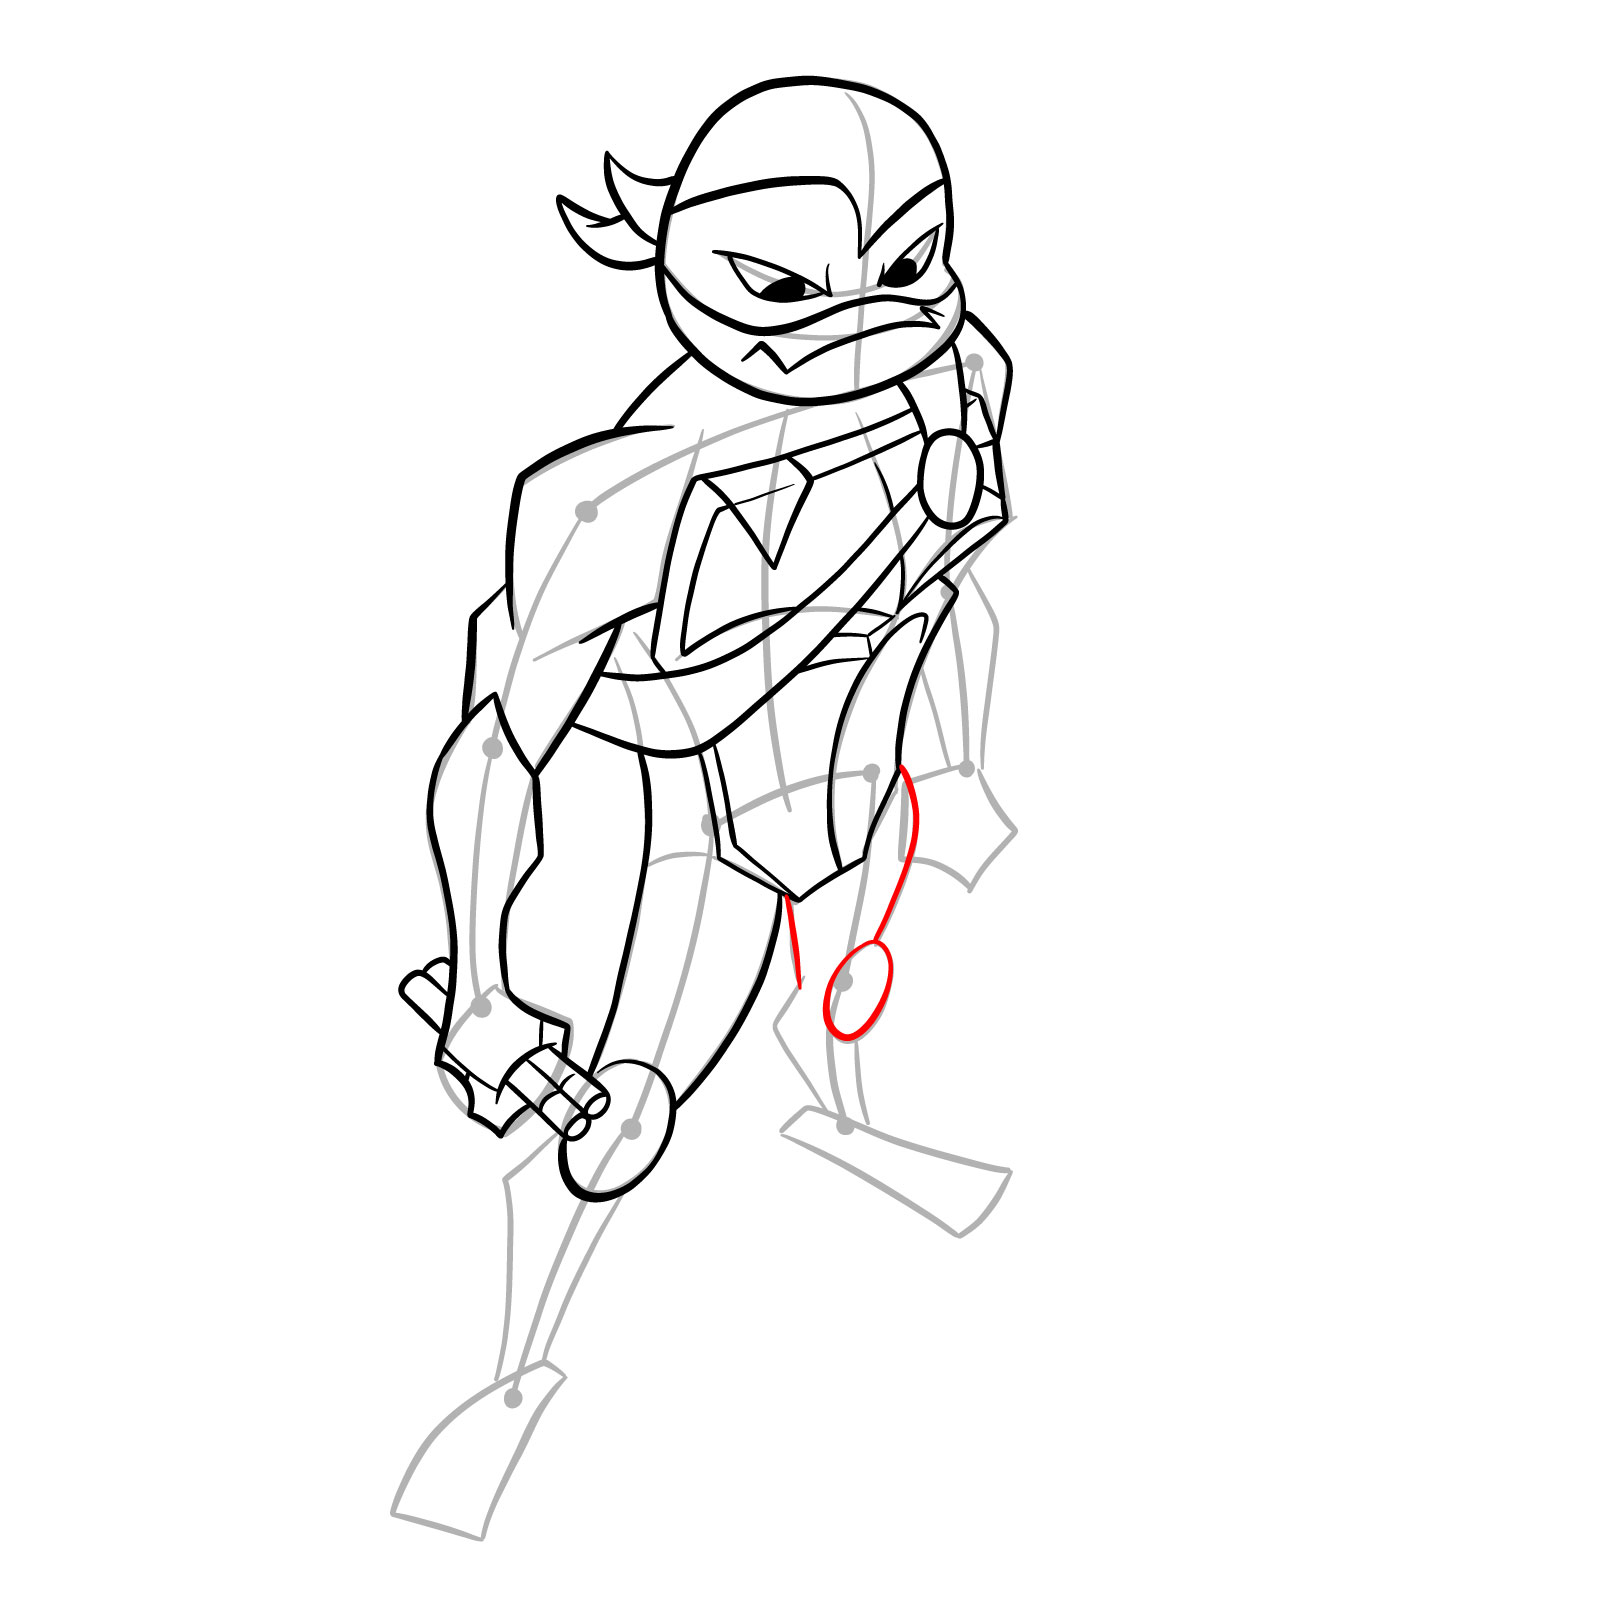 How to draw Mikey in Hamato Ninpō state - step 24